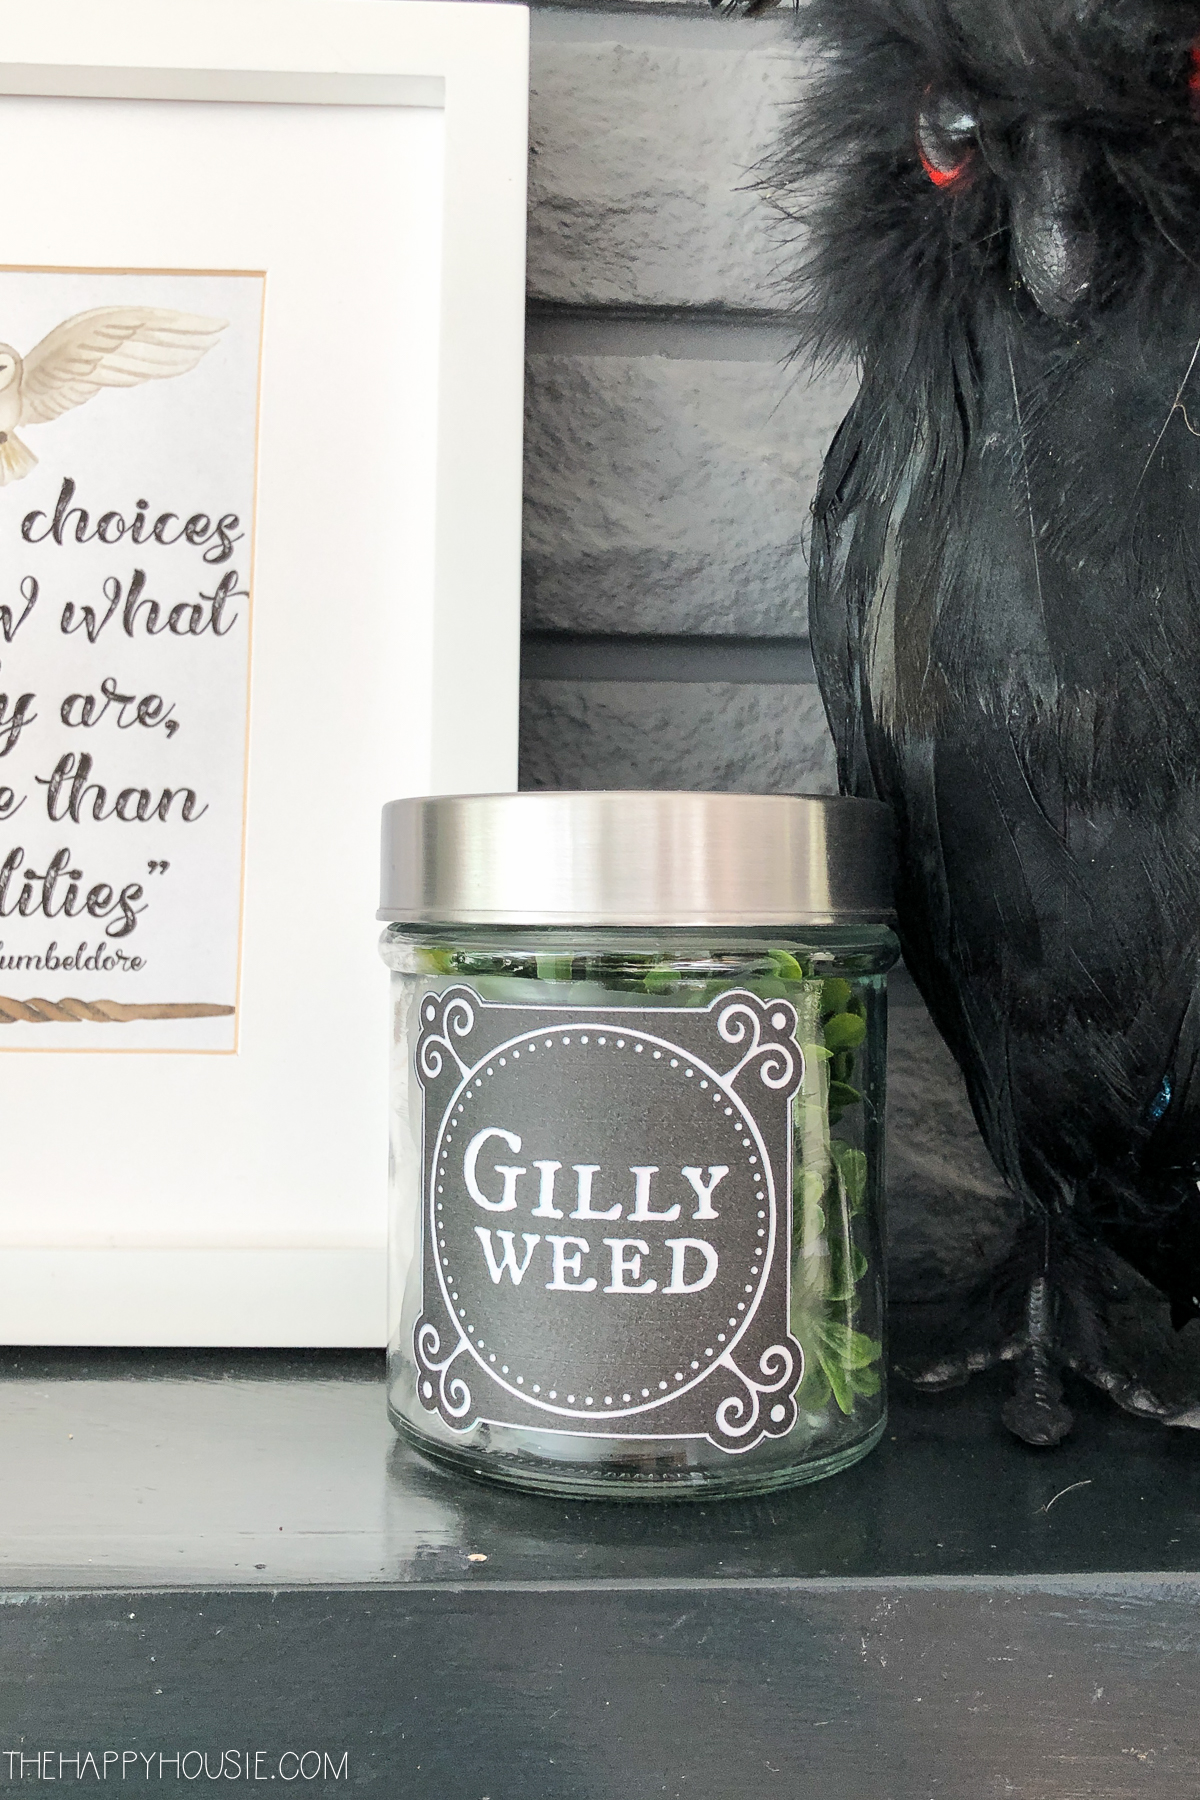 Gilly weed is in a jar.